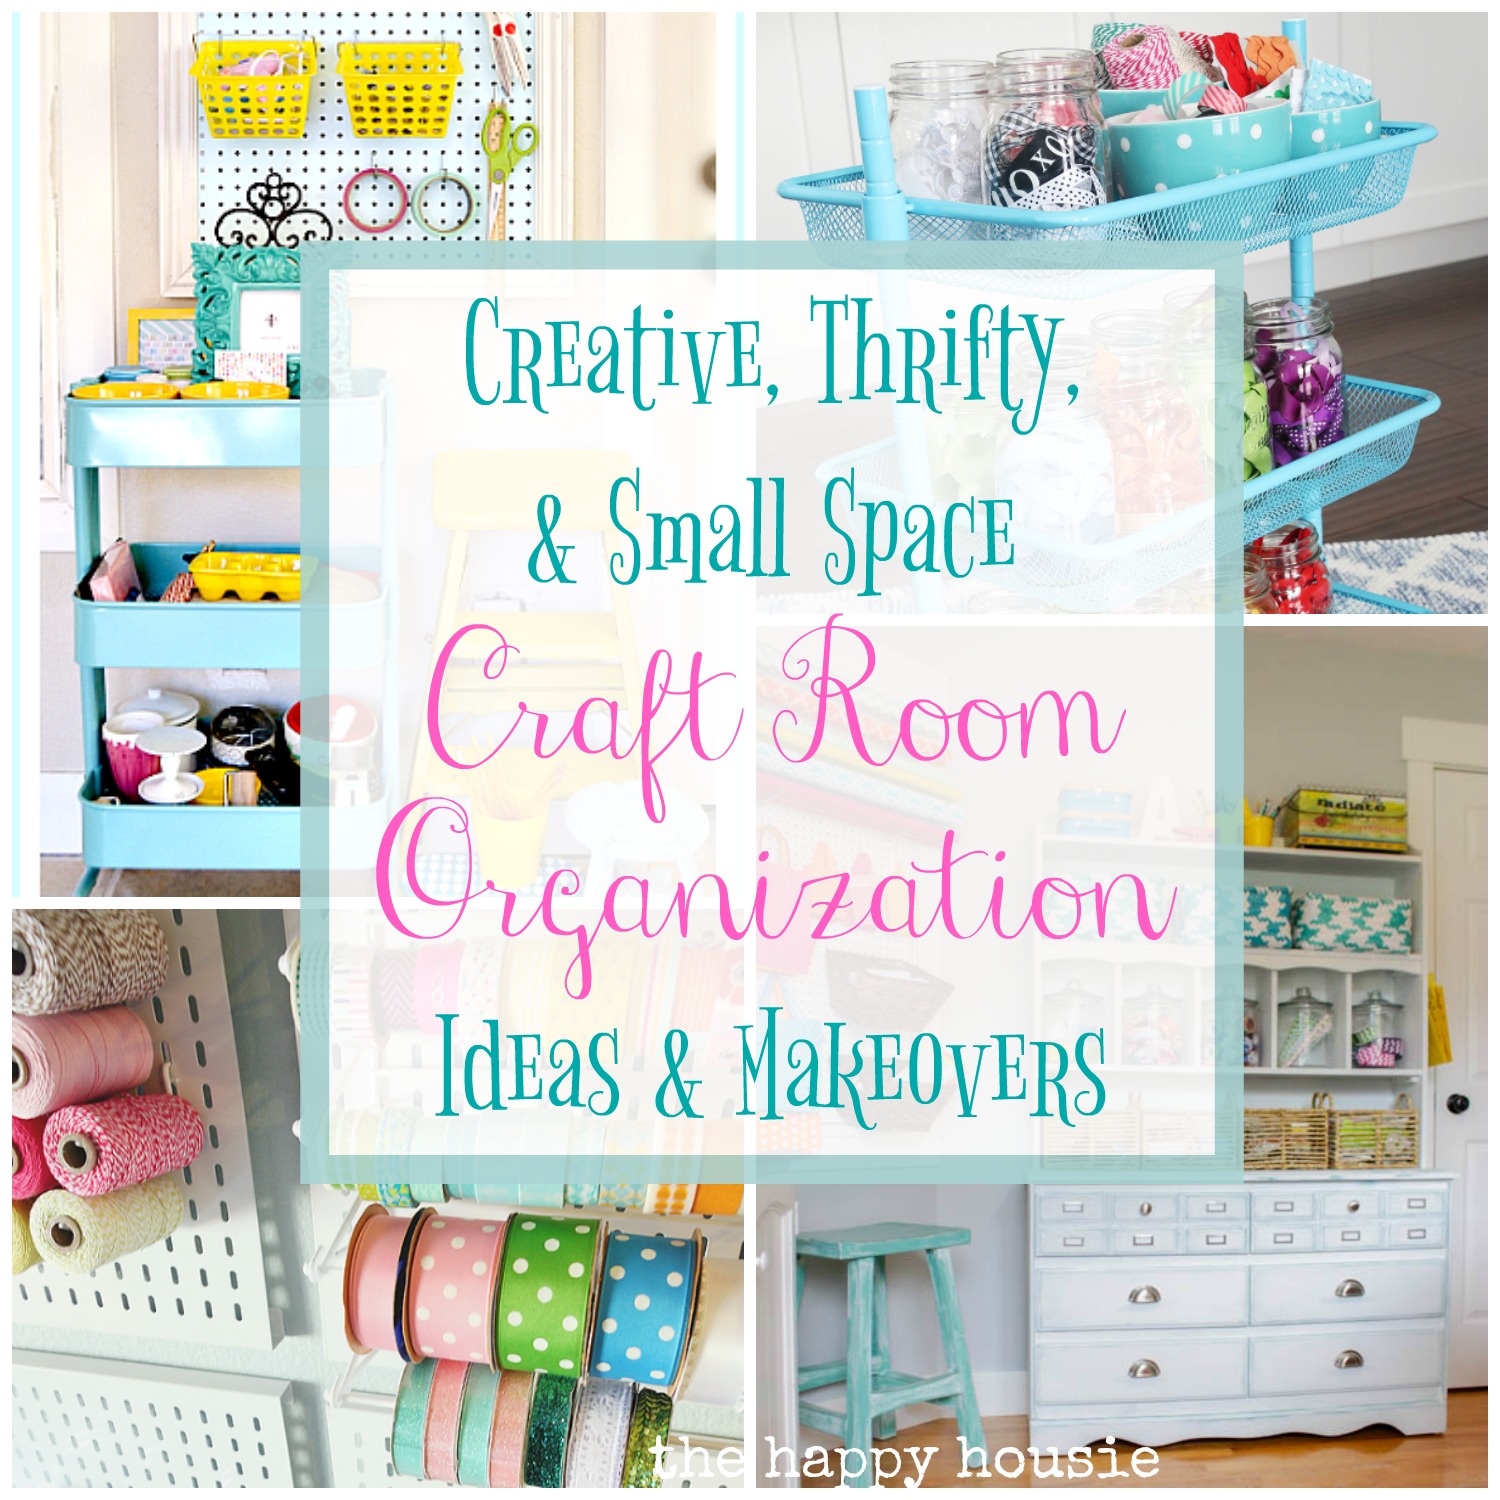 https://www.thehappyhousie.com/wp-content/uploads/2017/03/Super-creative-thrifty-and-small-space-craft-room-organization-ideas-and-makeovers-.jpg